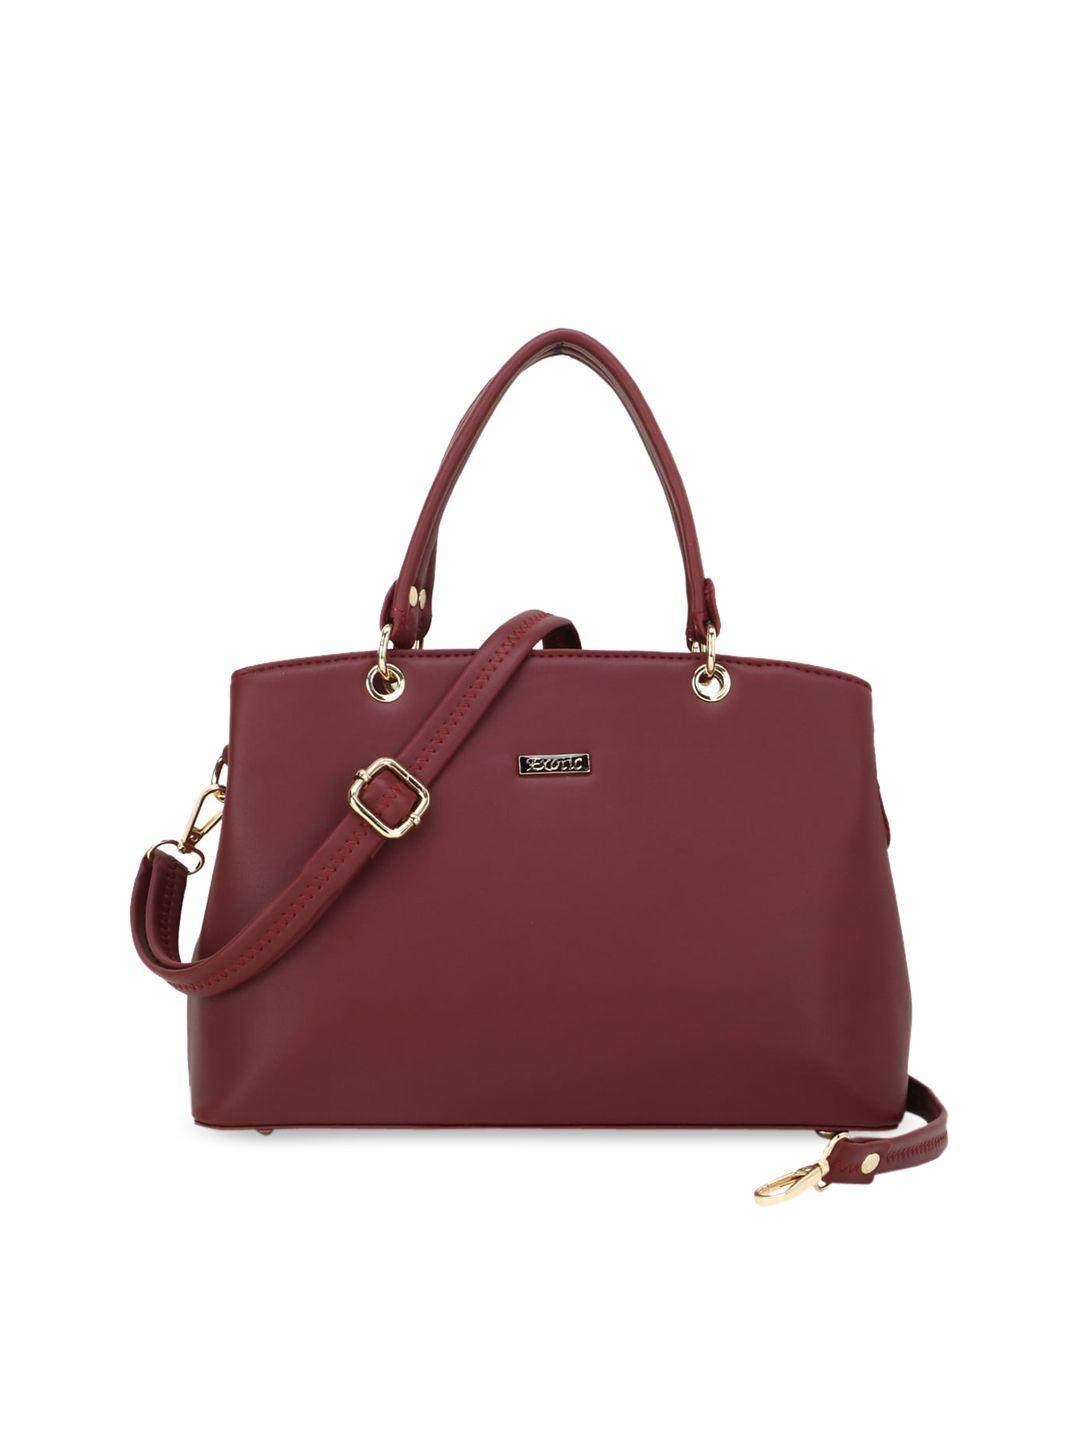 exotic maroon pu structured handheld bag with tasselled